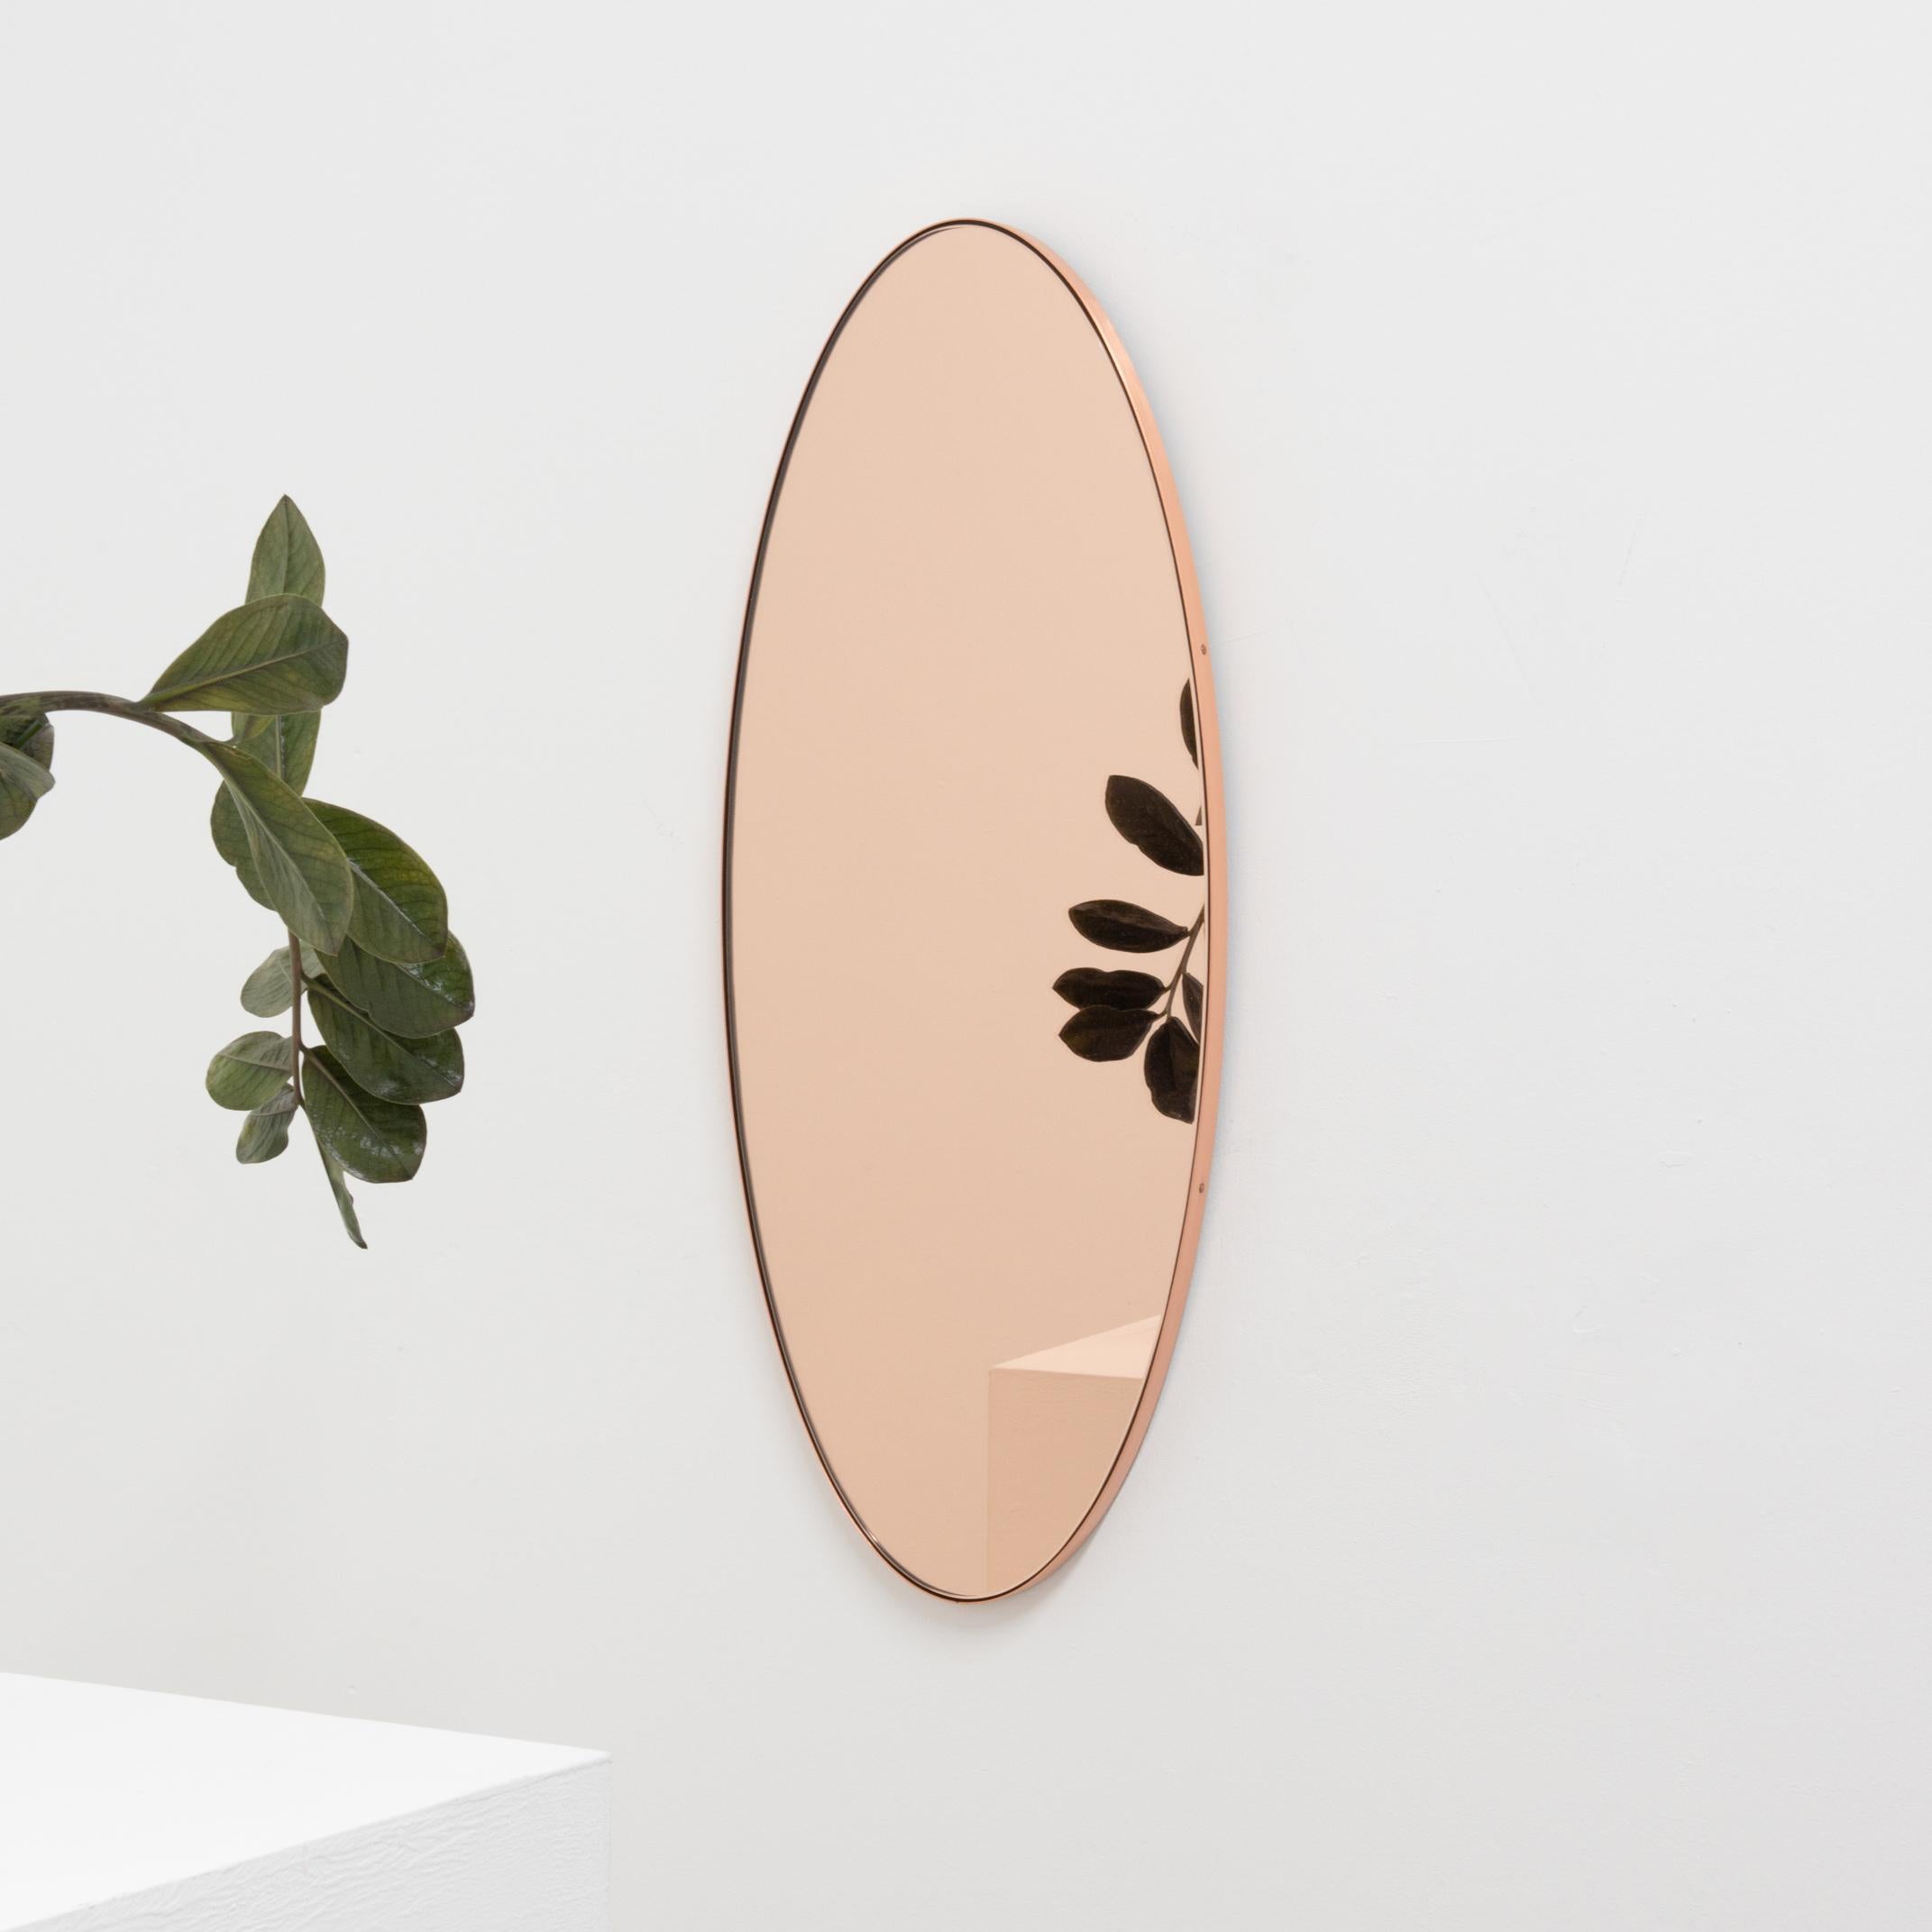 Ovalis Oval shaped Rose Gold Contemporary Mirror with a Copper Frame, Medium For Sale 2